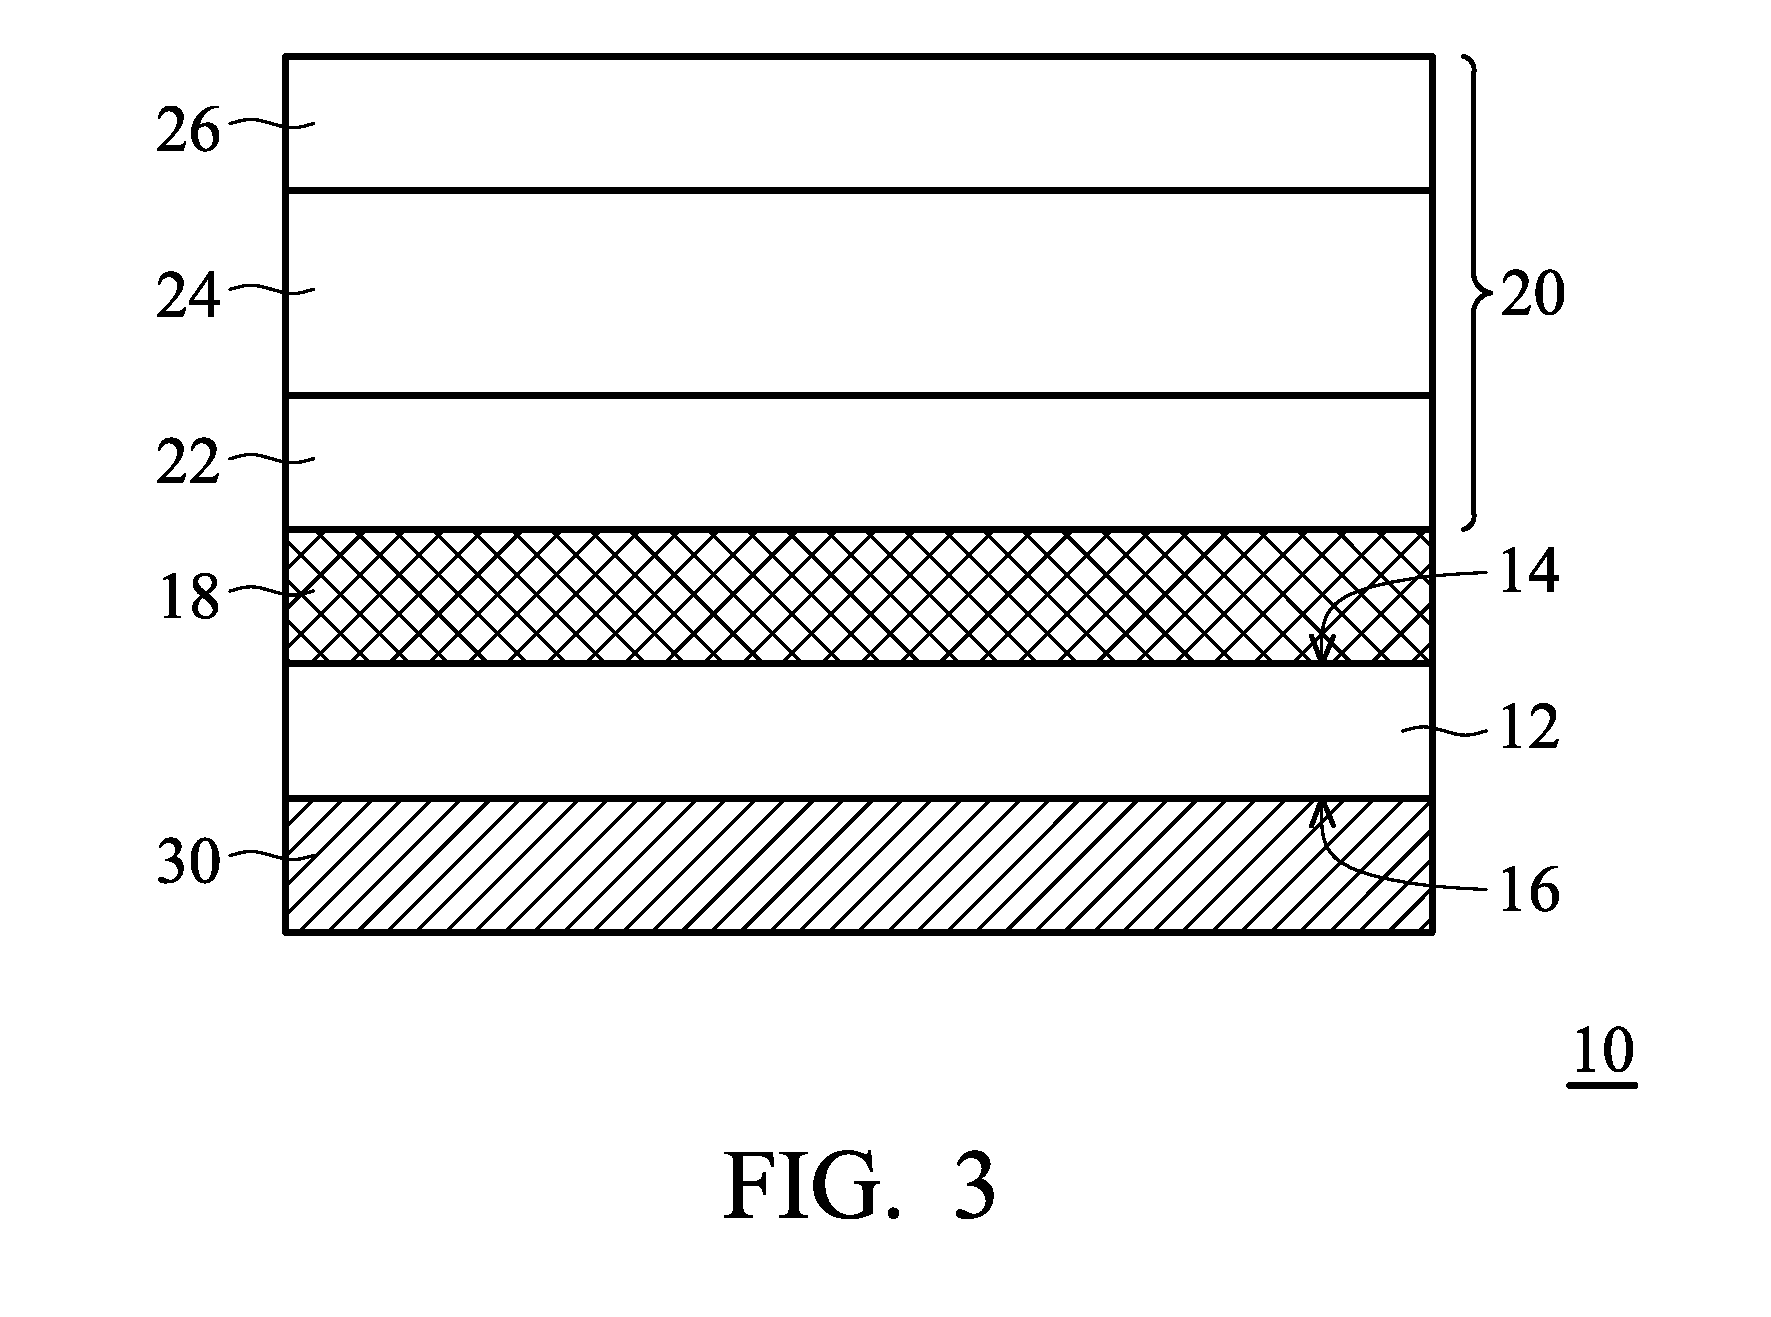 Optical device structures with the light outcoupling layers